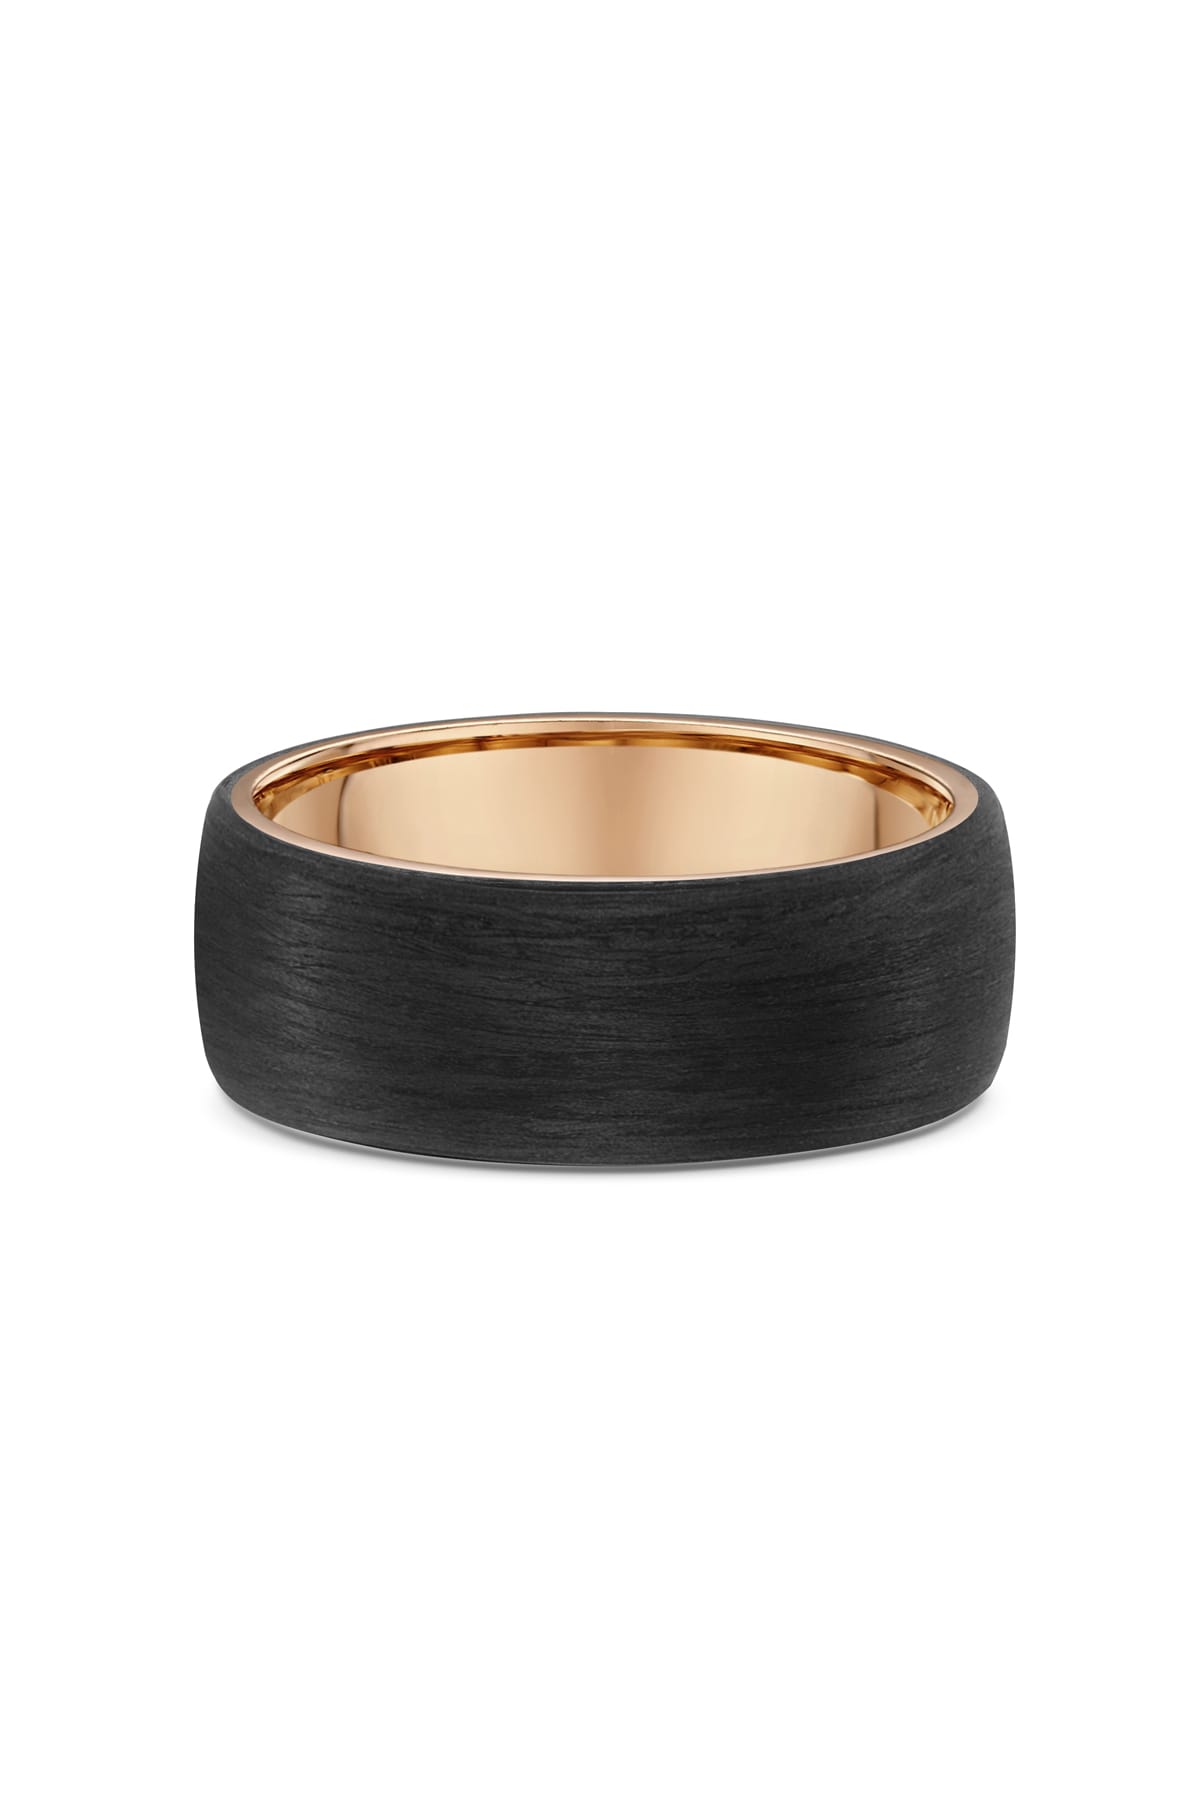 Men's Carbon Fibre And Rose Gold Wedding Ring available at LeGassick Diamonds and Jewellery Gold Coast, Australia.